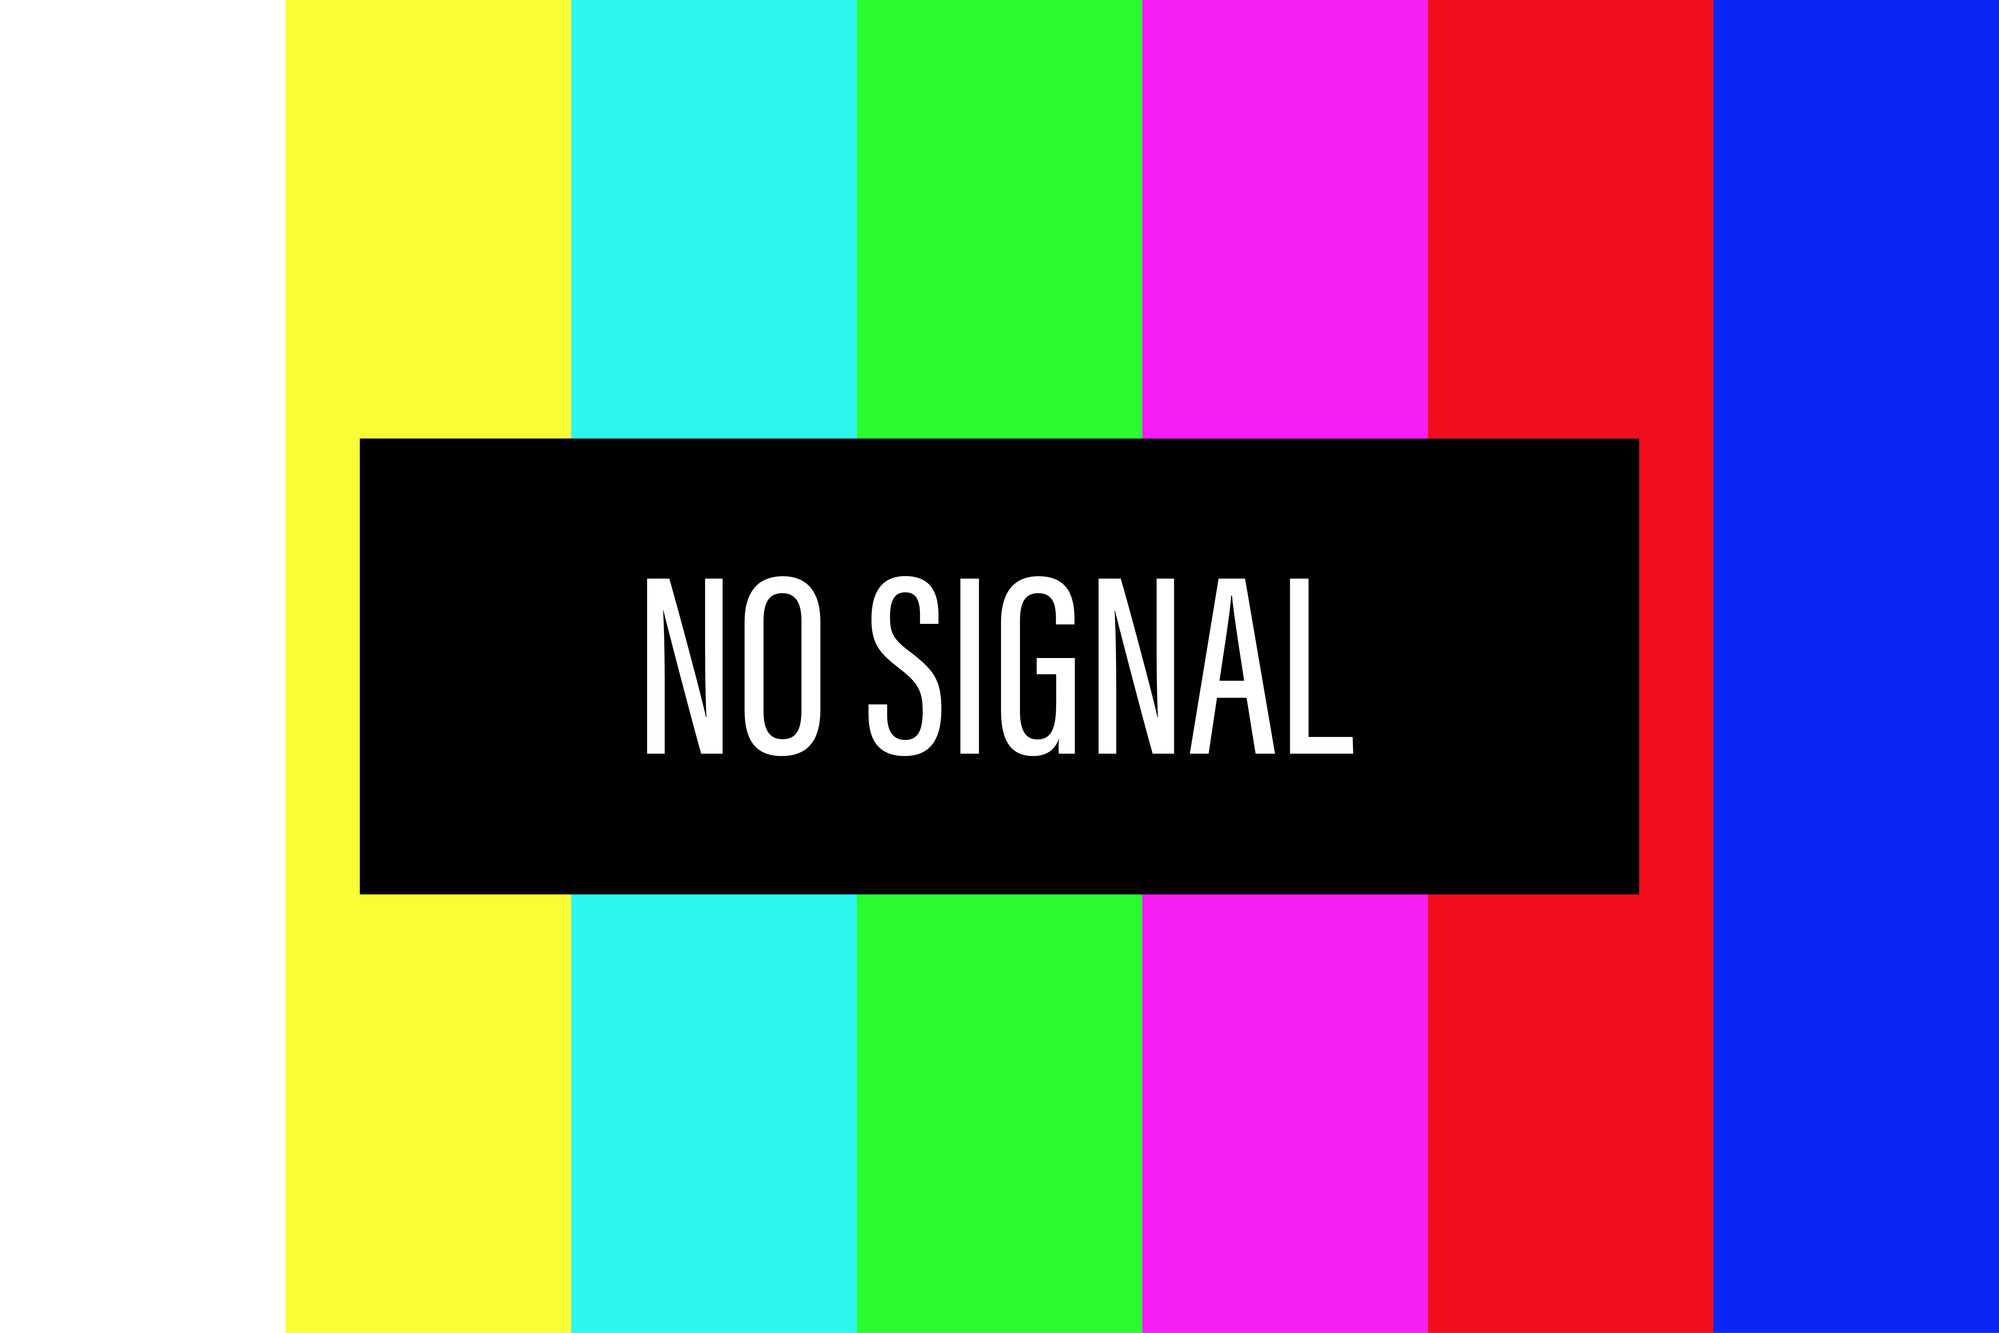 image of 'no signal' TV screen with test pattern